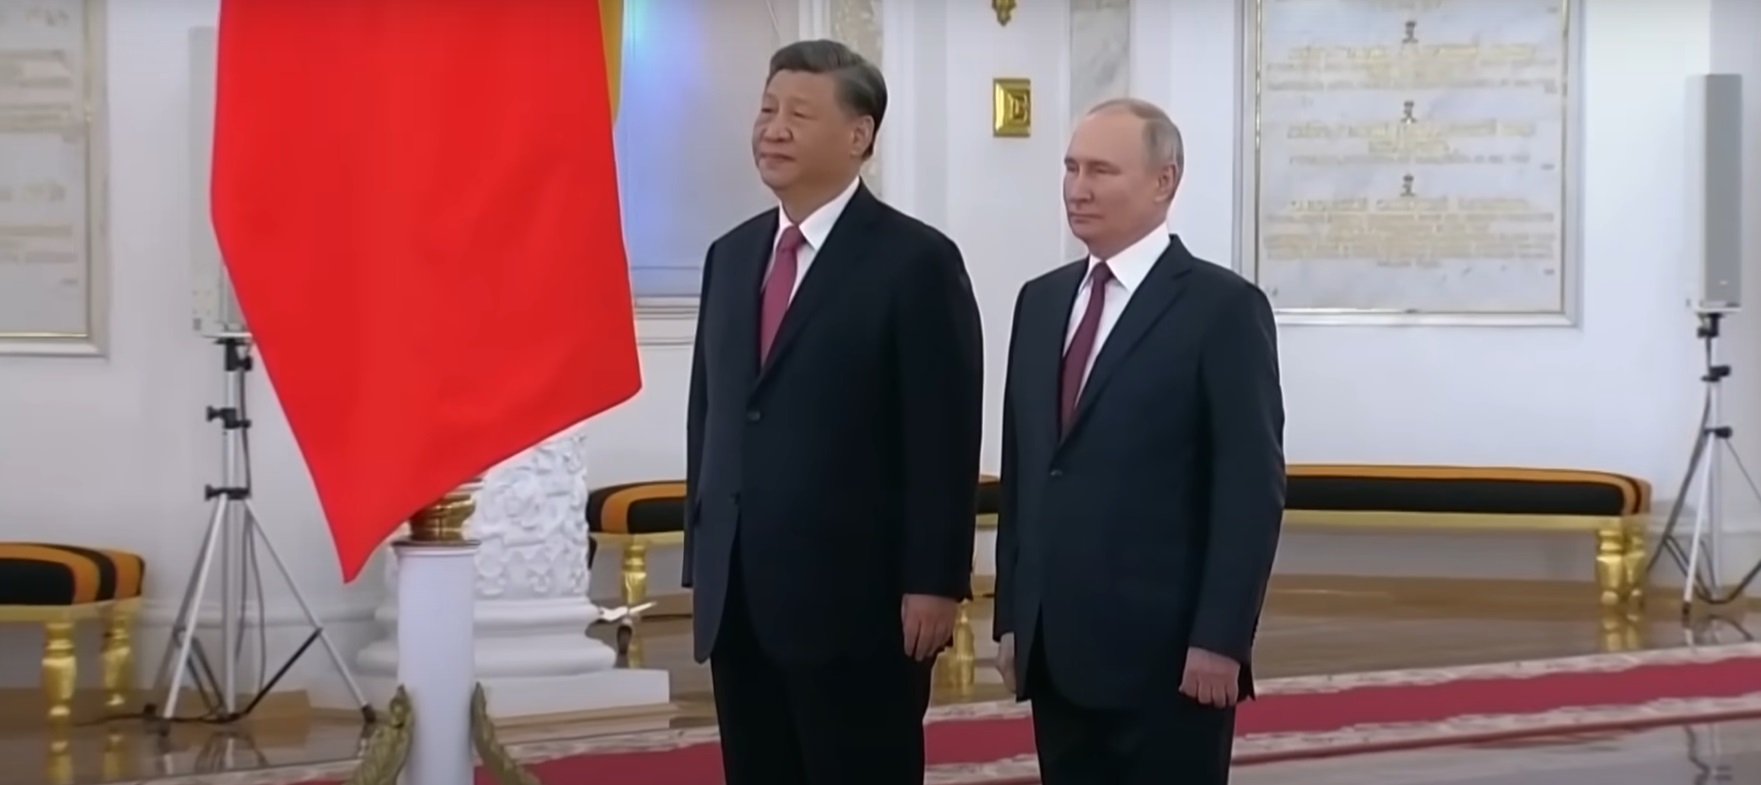 Russia’s instability may disrupt Xi Jinping’s plans to invade Taiwan.